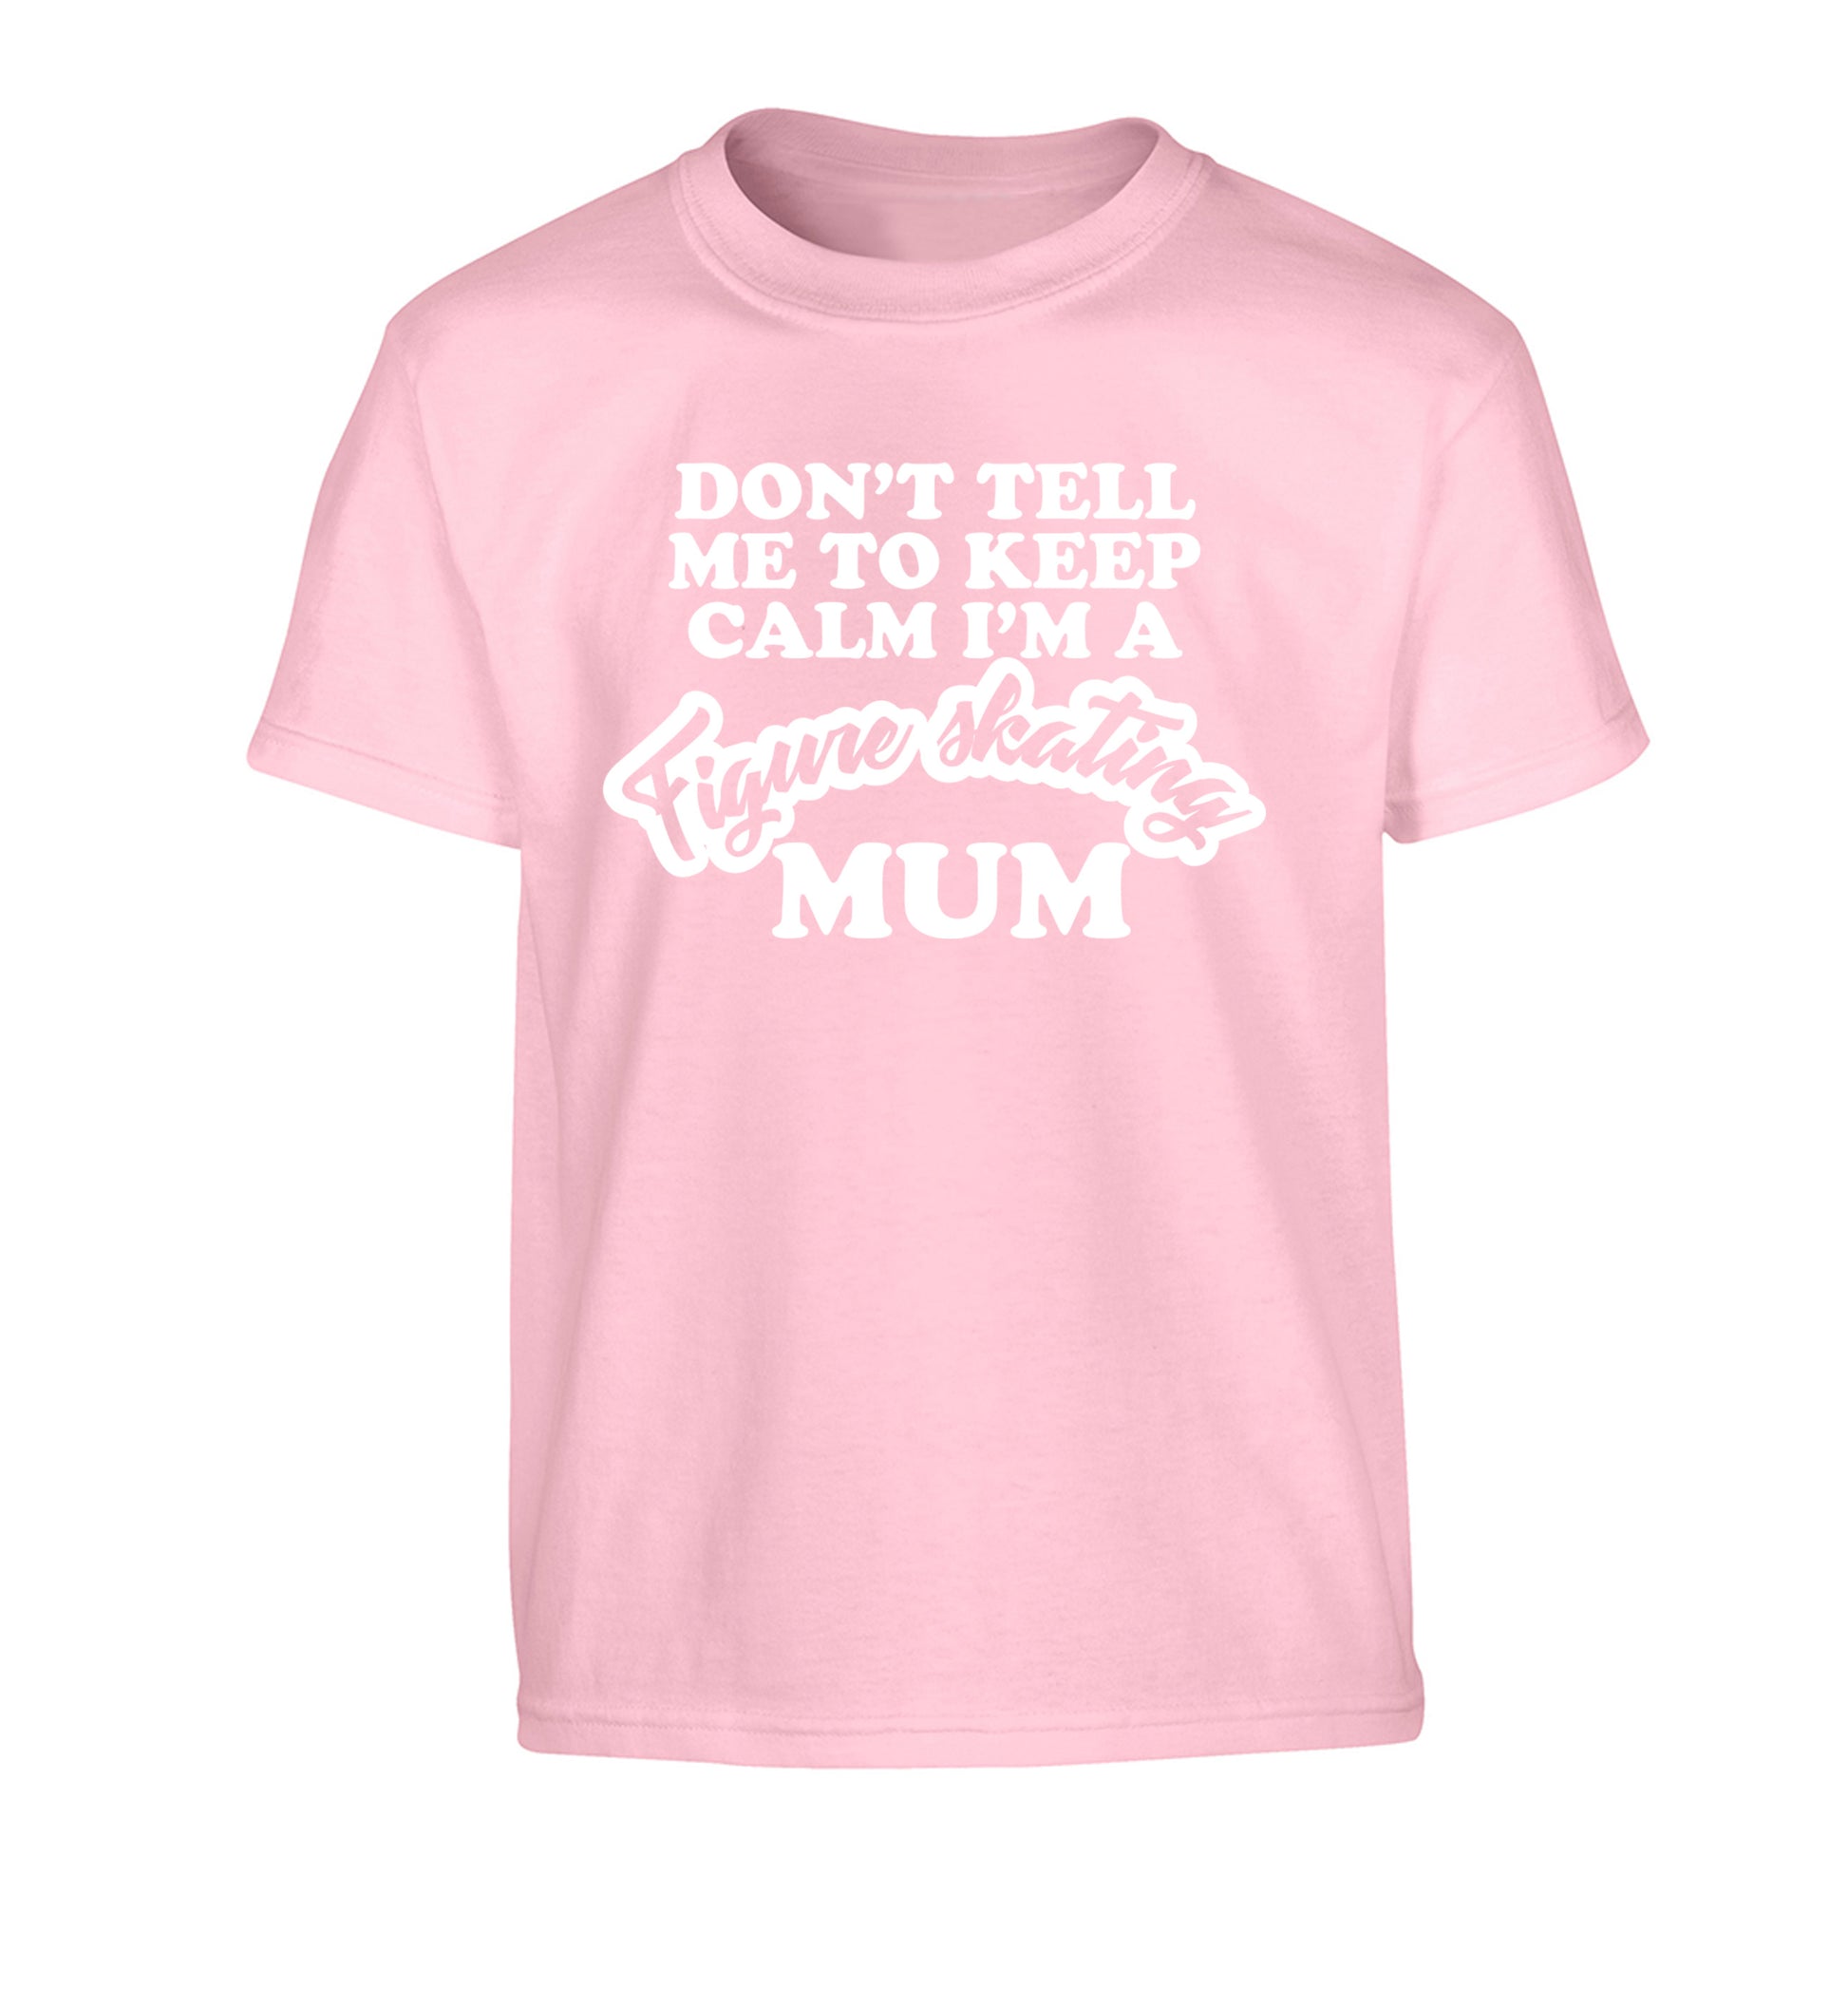 Don't tell me to keep calm I'm a figure skating mum Children's light pink Tshirt 12-14 Years